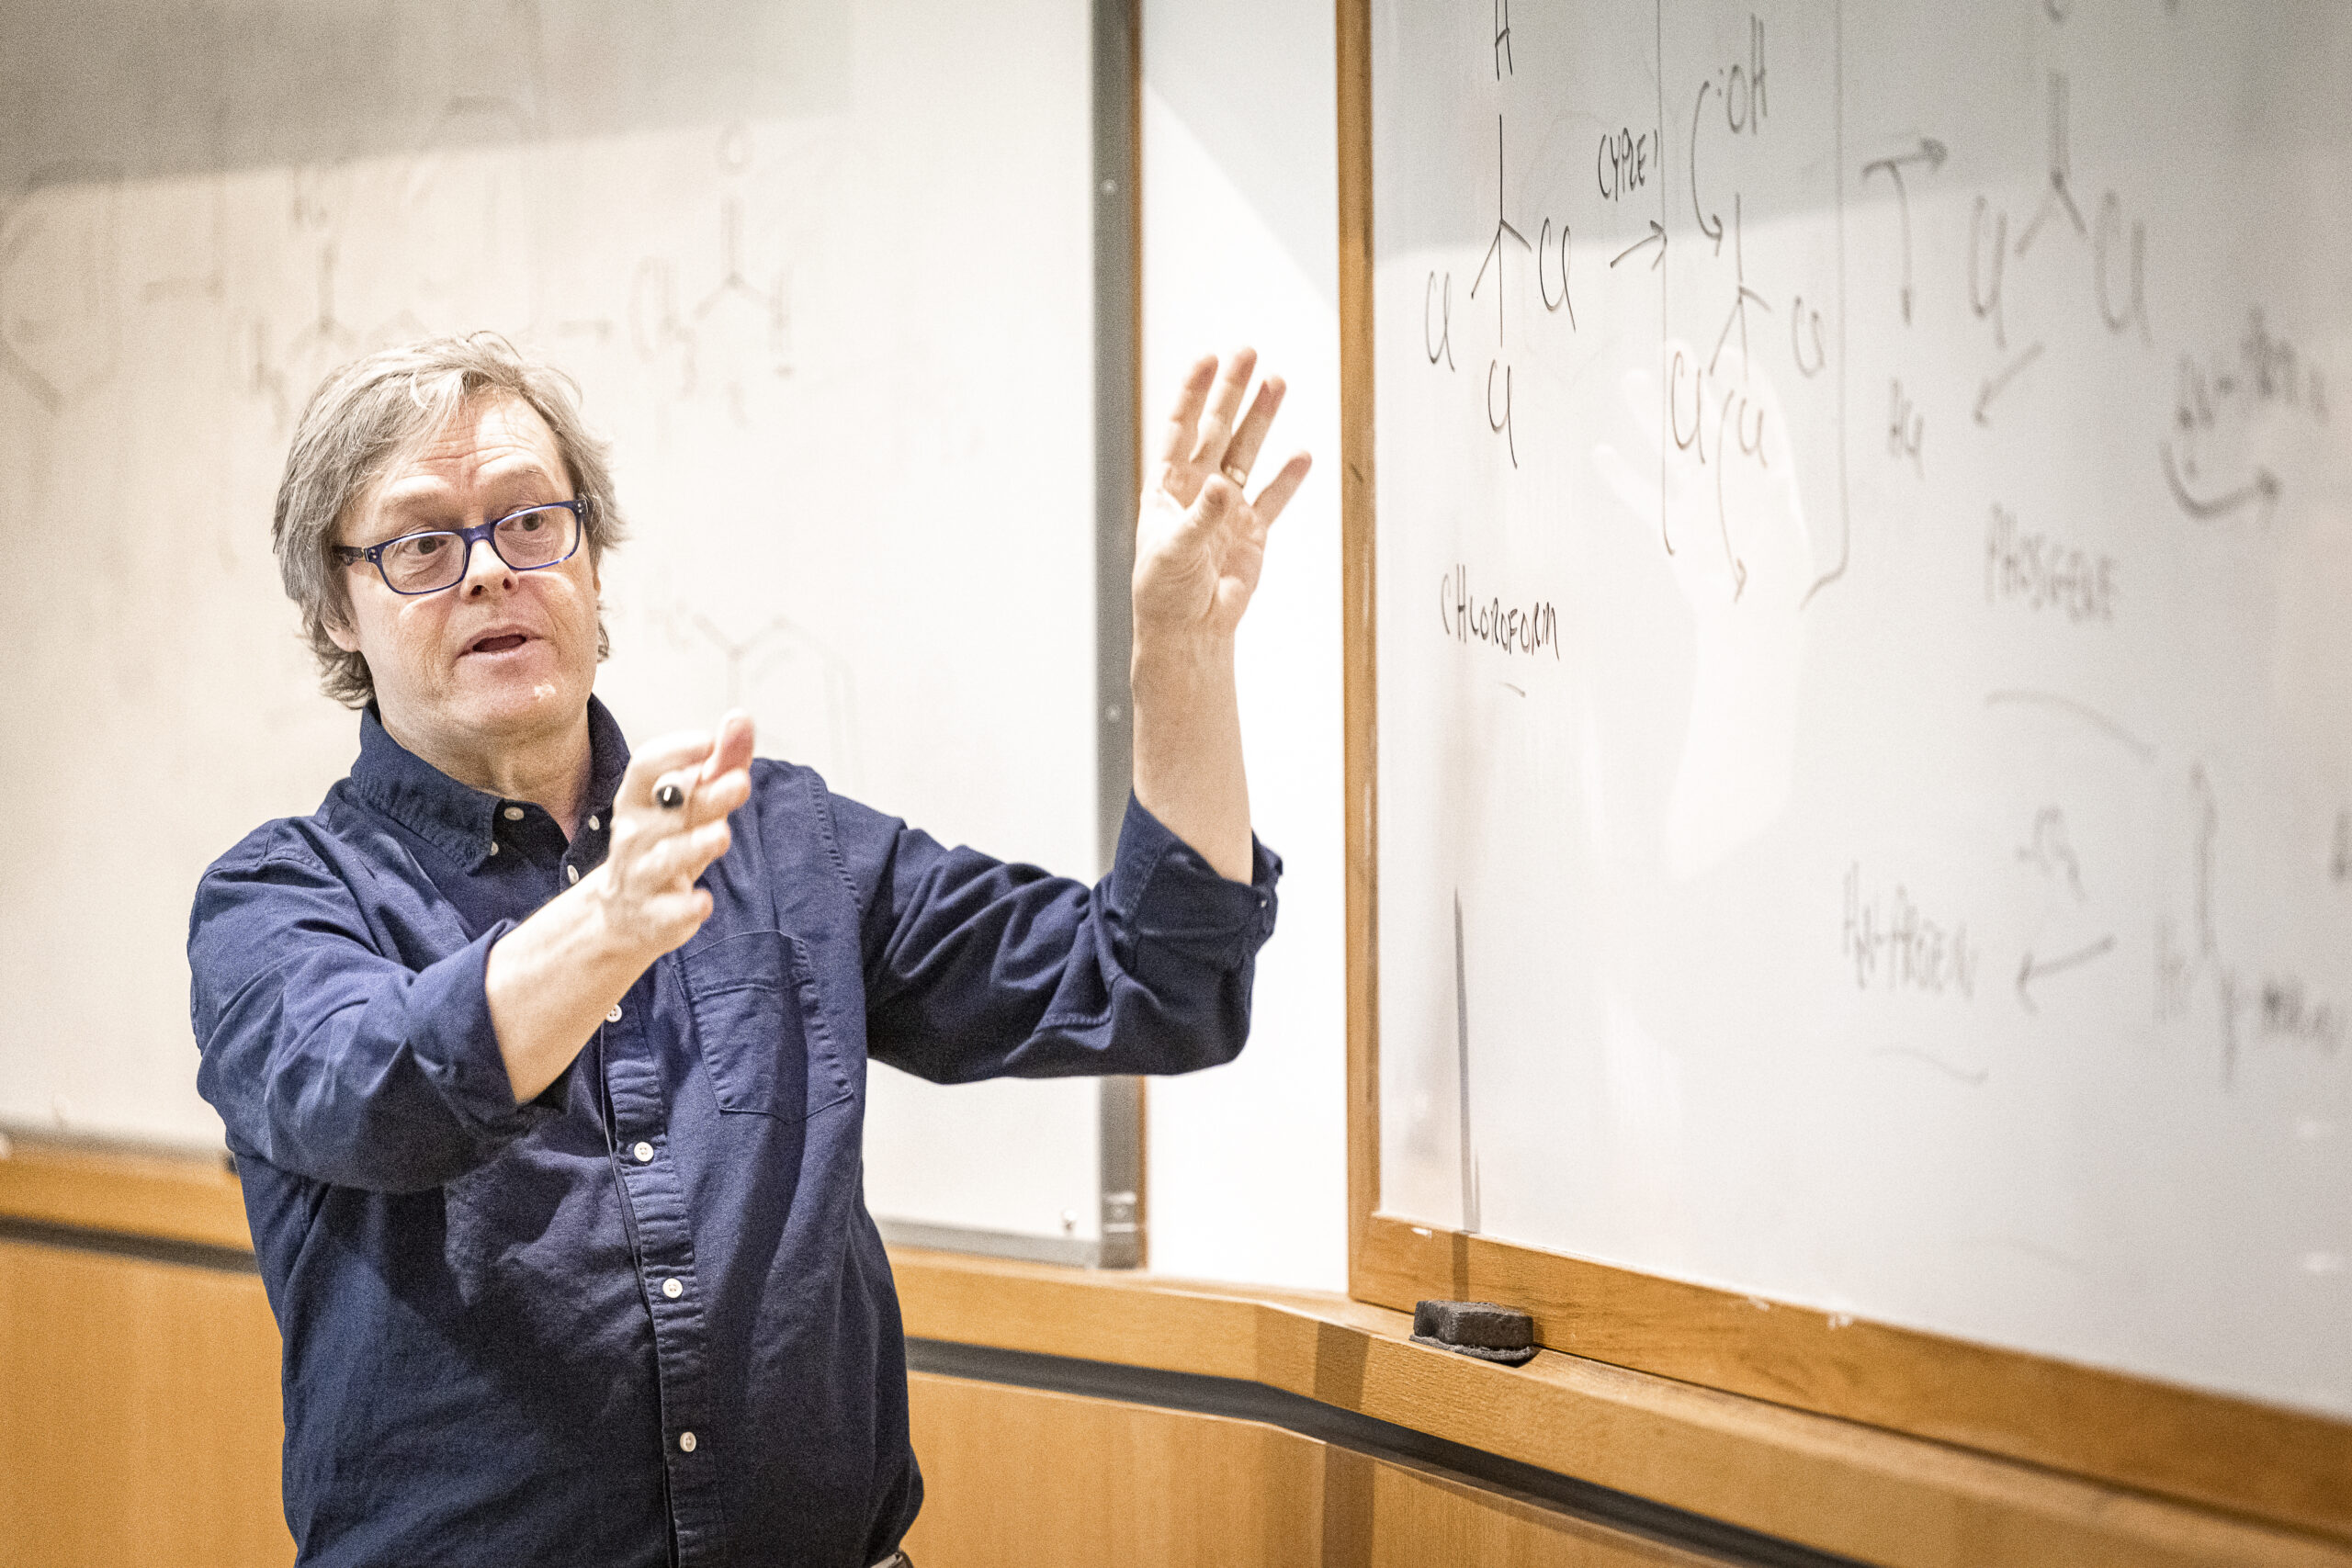 Charles Lauhon stands in front of a white board teaching a course. Photo by Bryce Richter